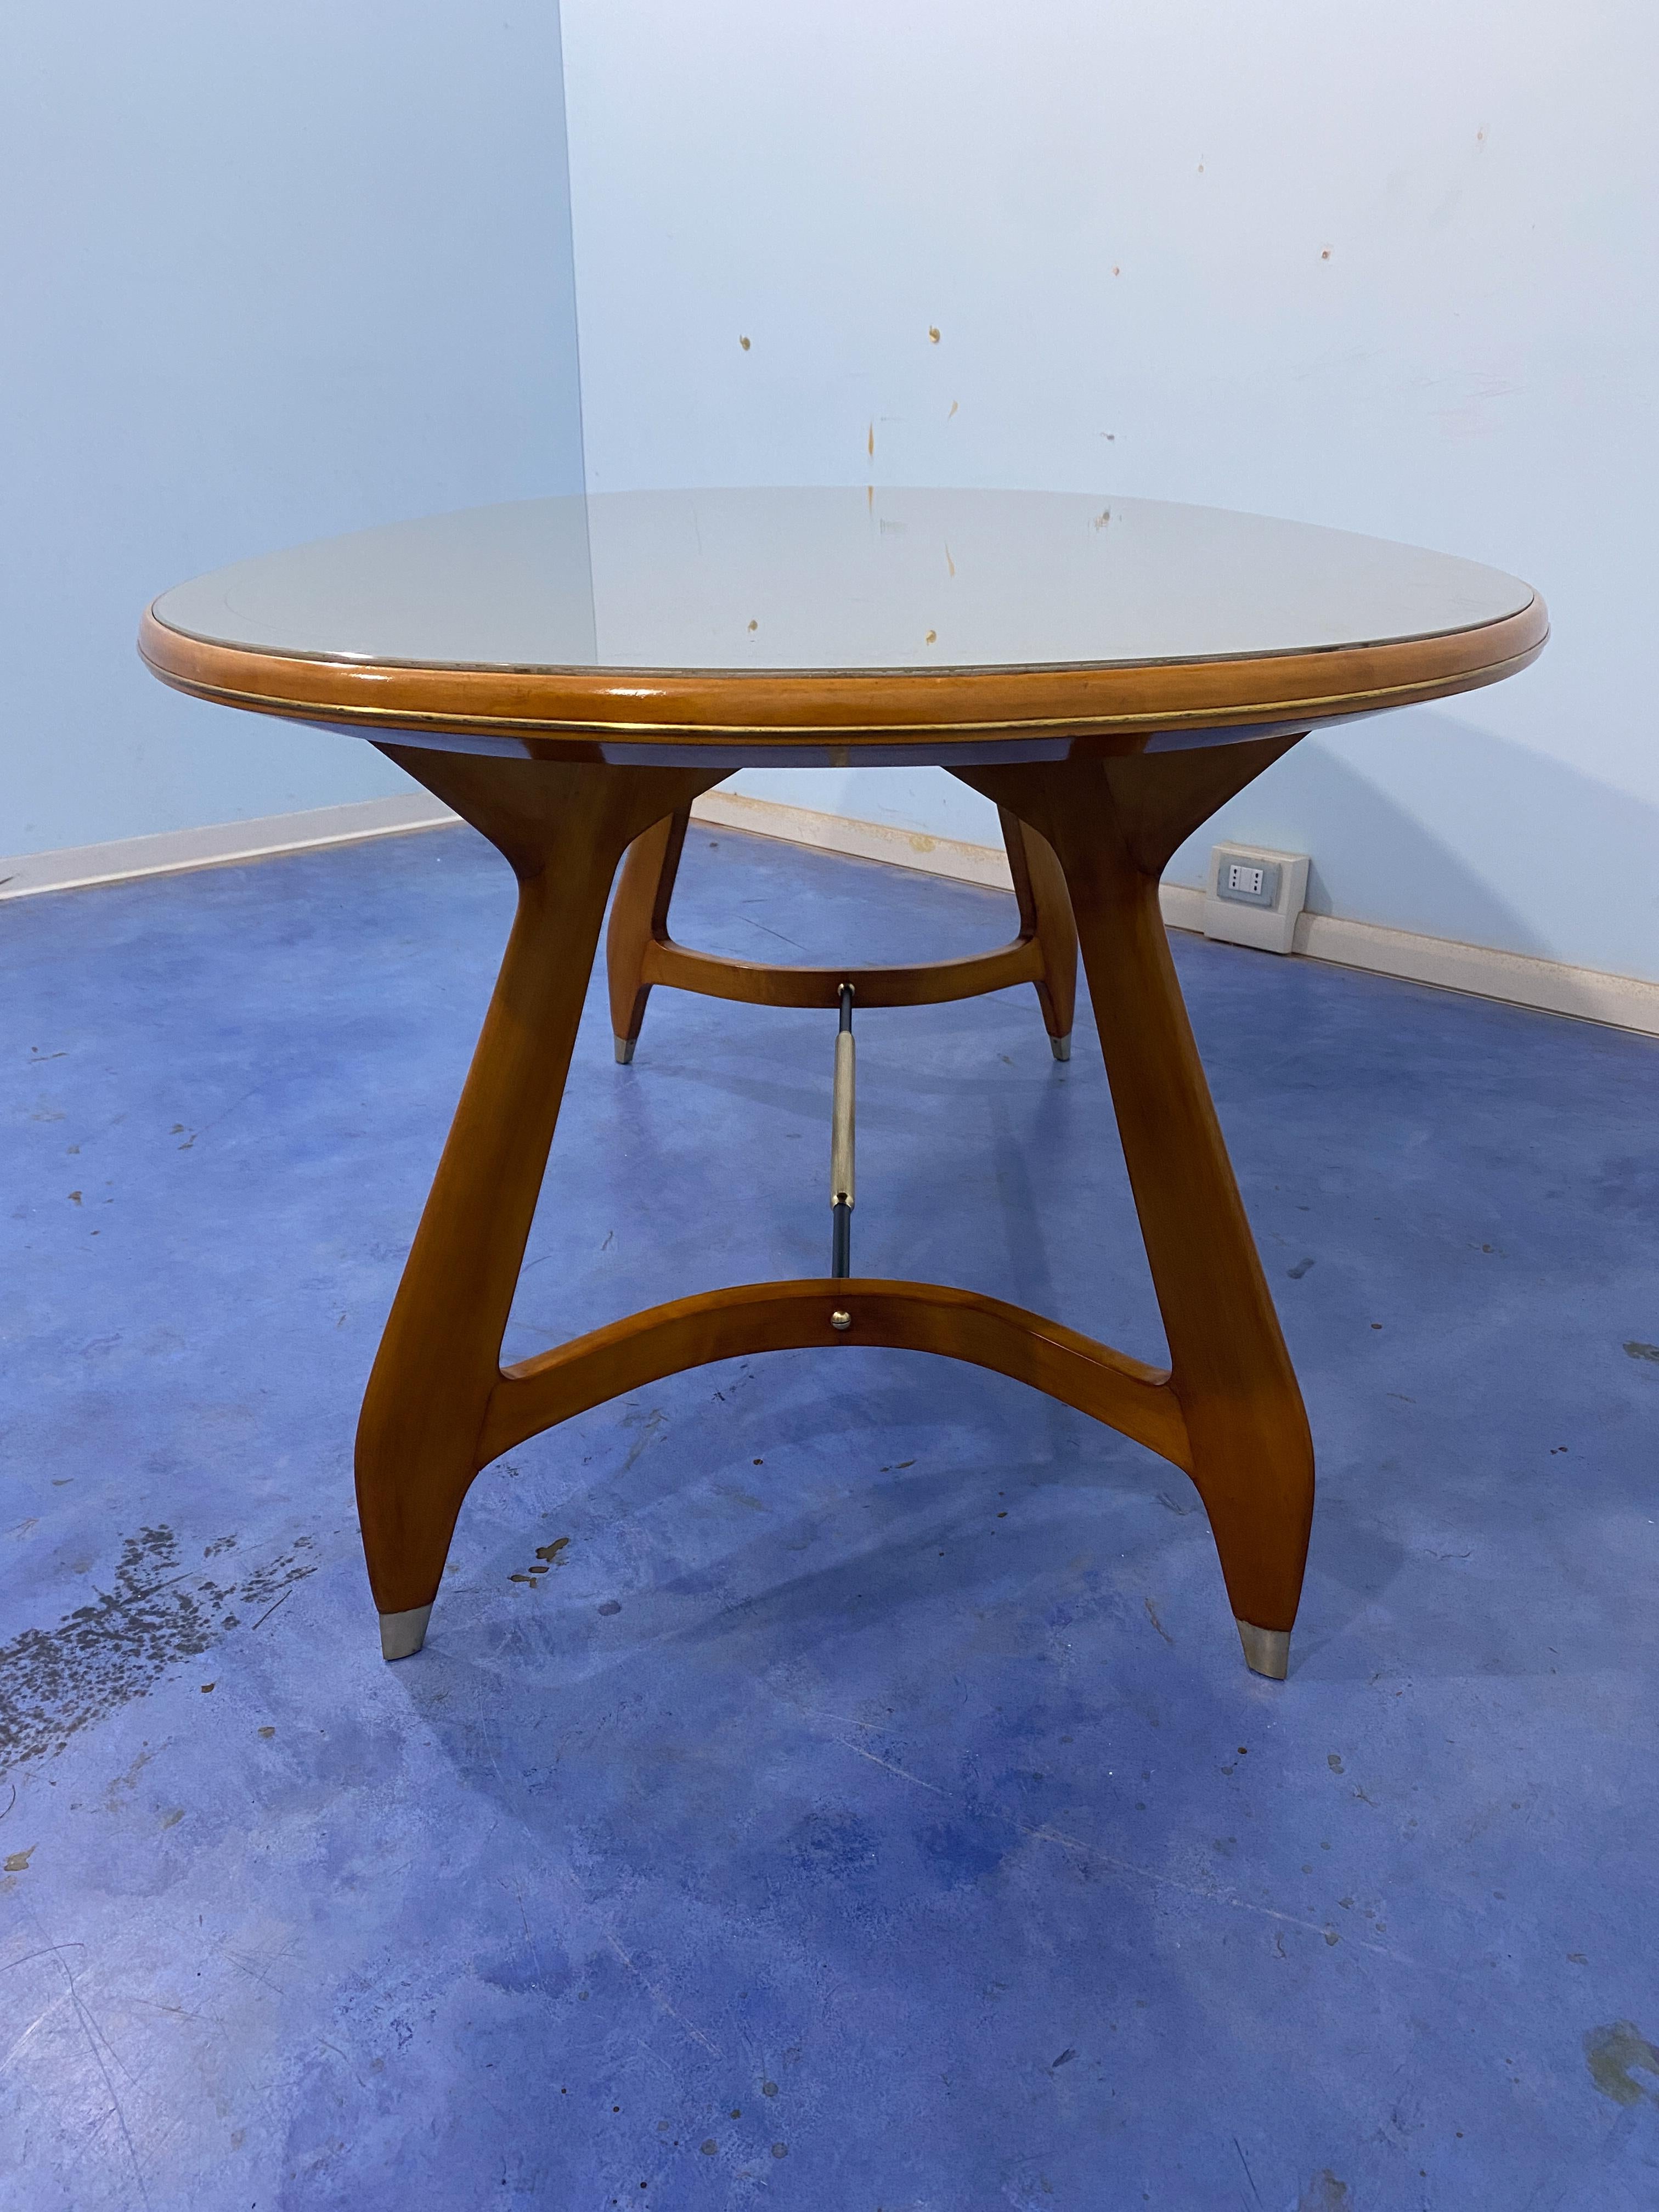 Italian Midcentury Green Olive Dining Table by Vittorio Dassi, 1950s For Sale 2